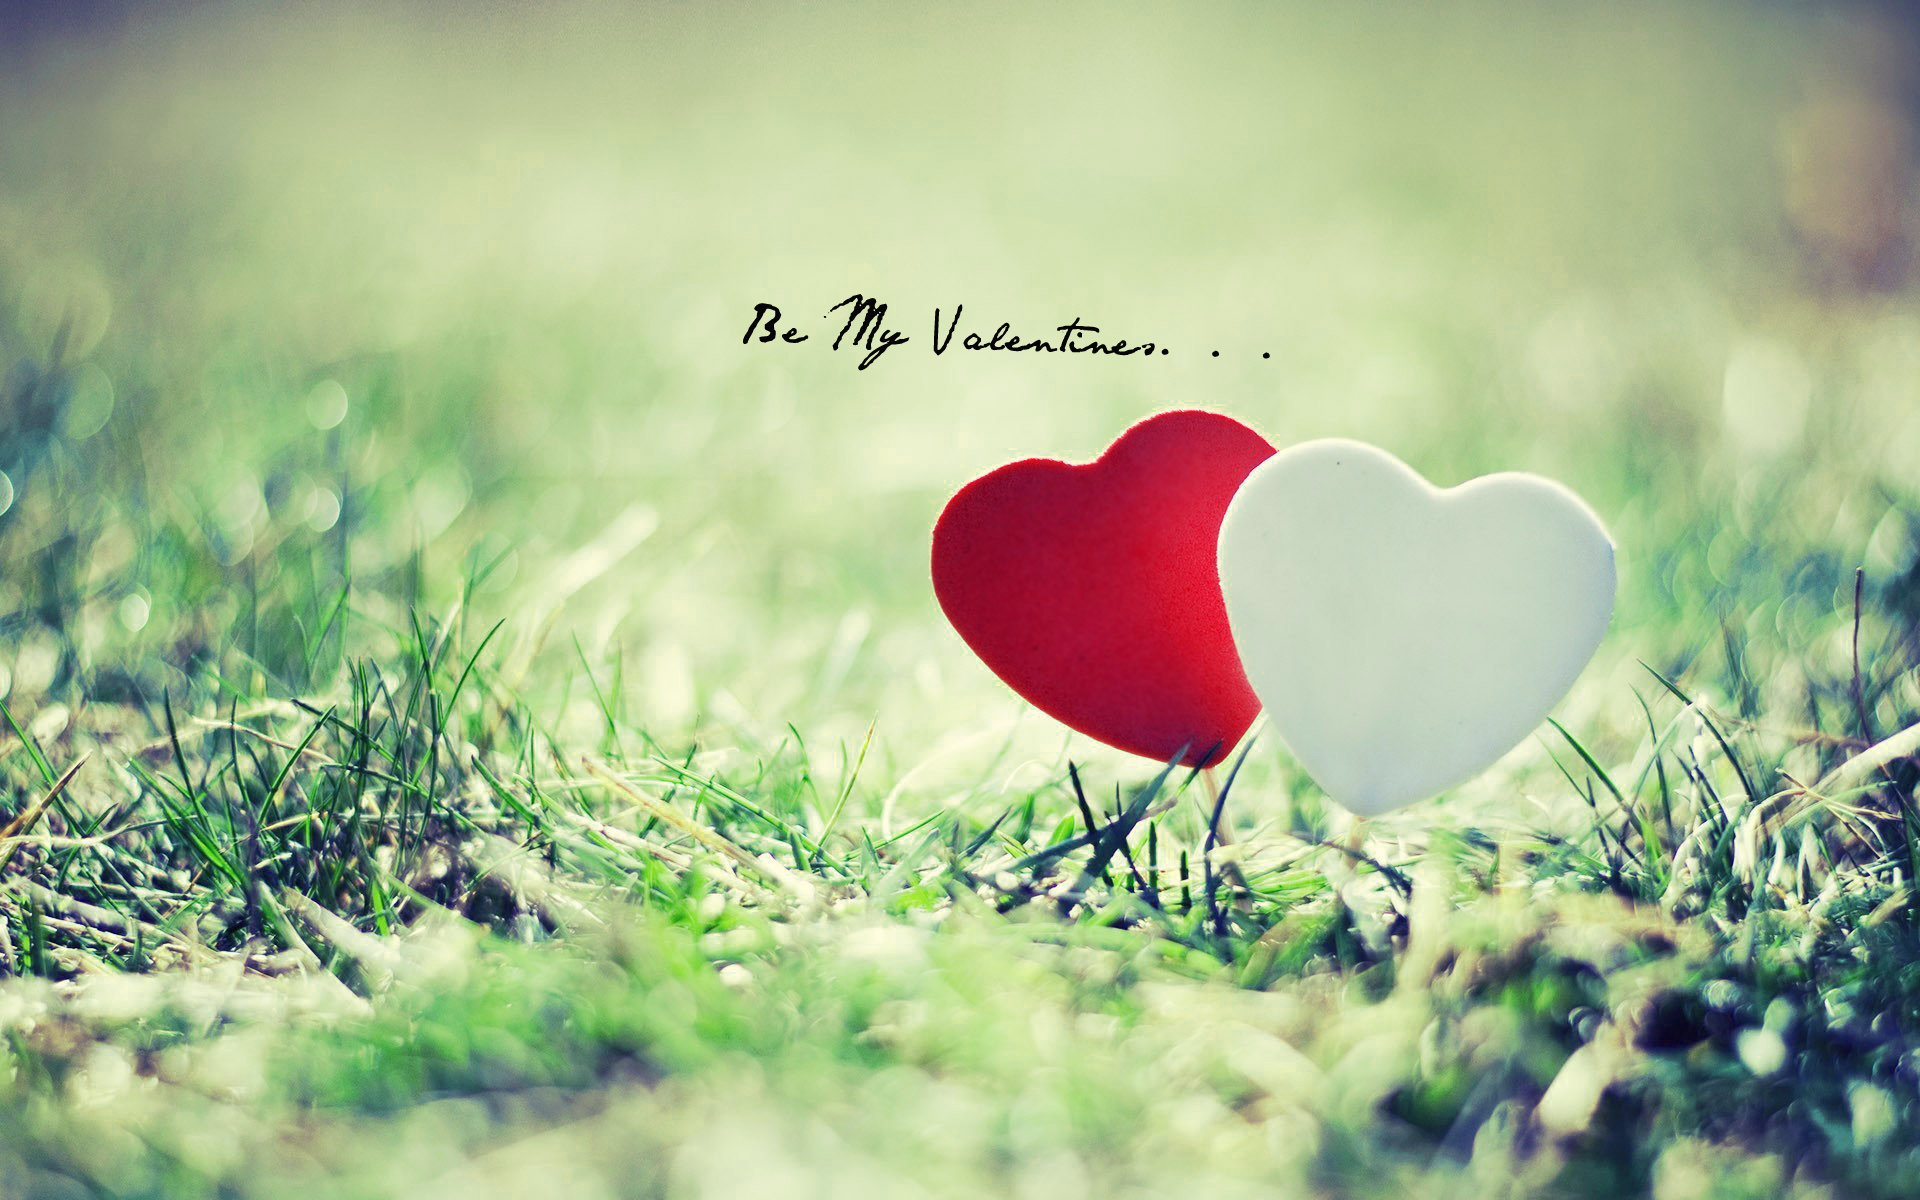 Velentines day wallpaper for the month of love (5)